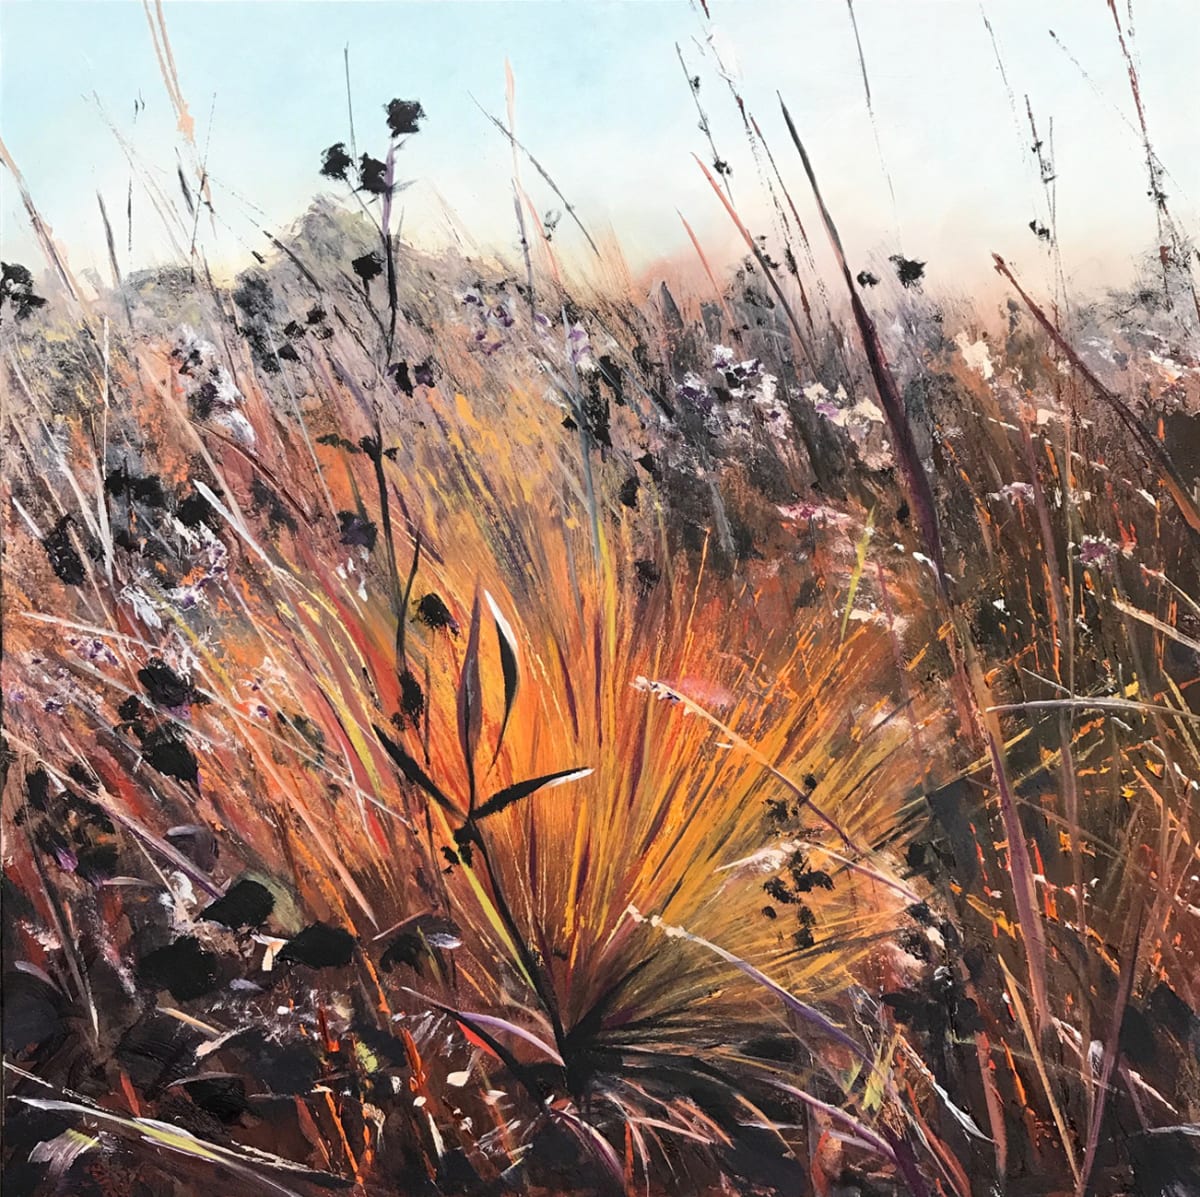 Grass Flame by Jan Elbert  Image: "Grass Flame"  Impression of prairie field during seed harvest.